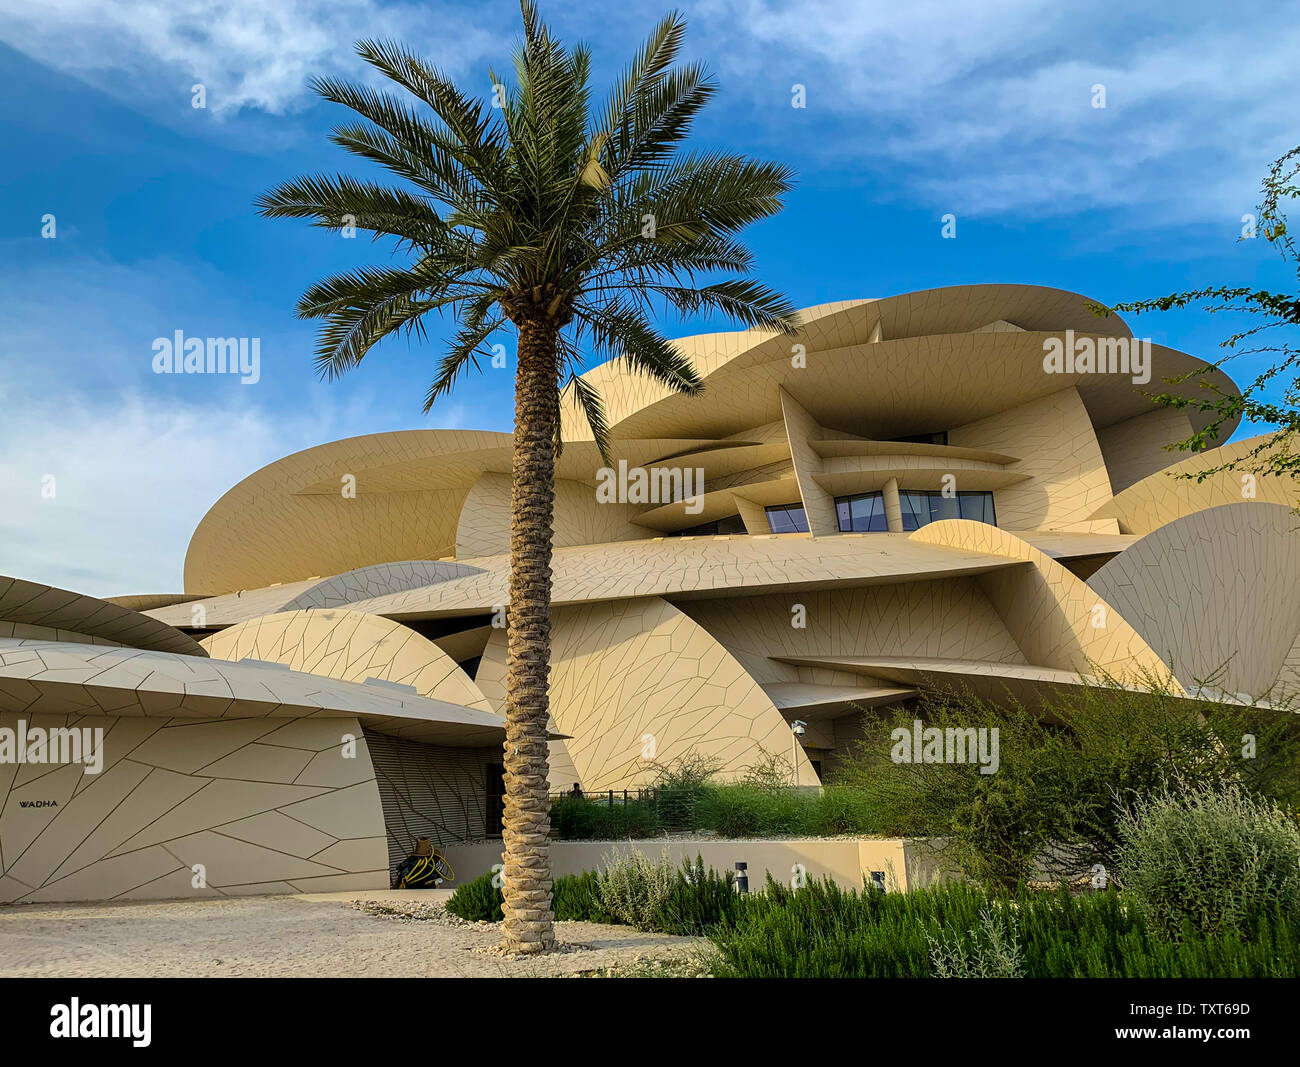 National museum of Qatar, Doha. The museum is shaped like a desert rose and is newly build. Stock Photo